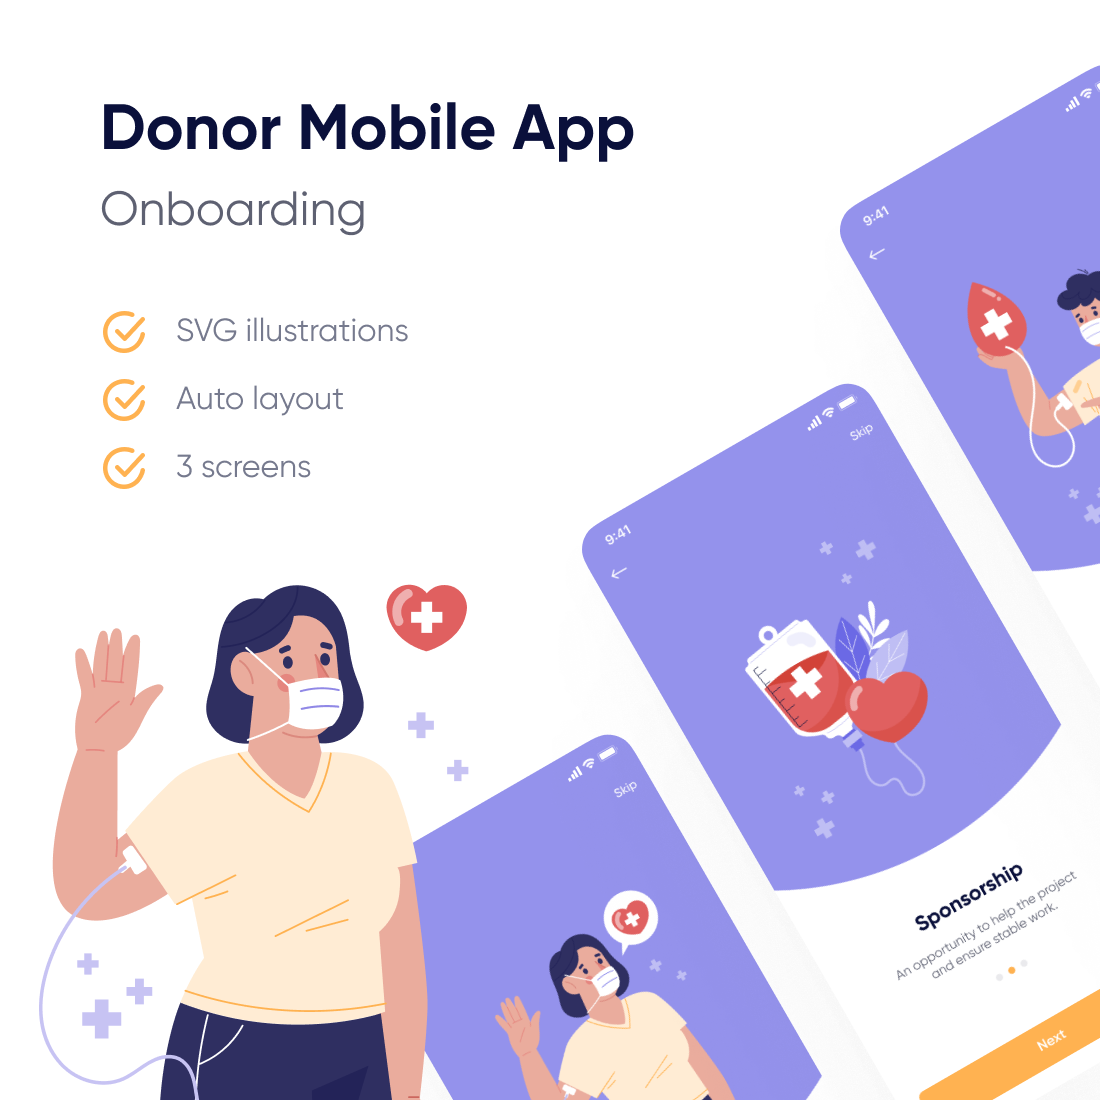 Donor Mobile App | Onboarding cover image.